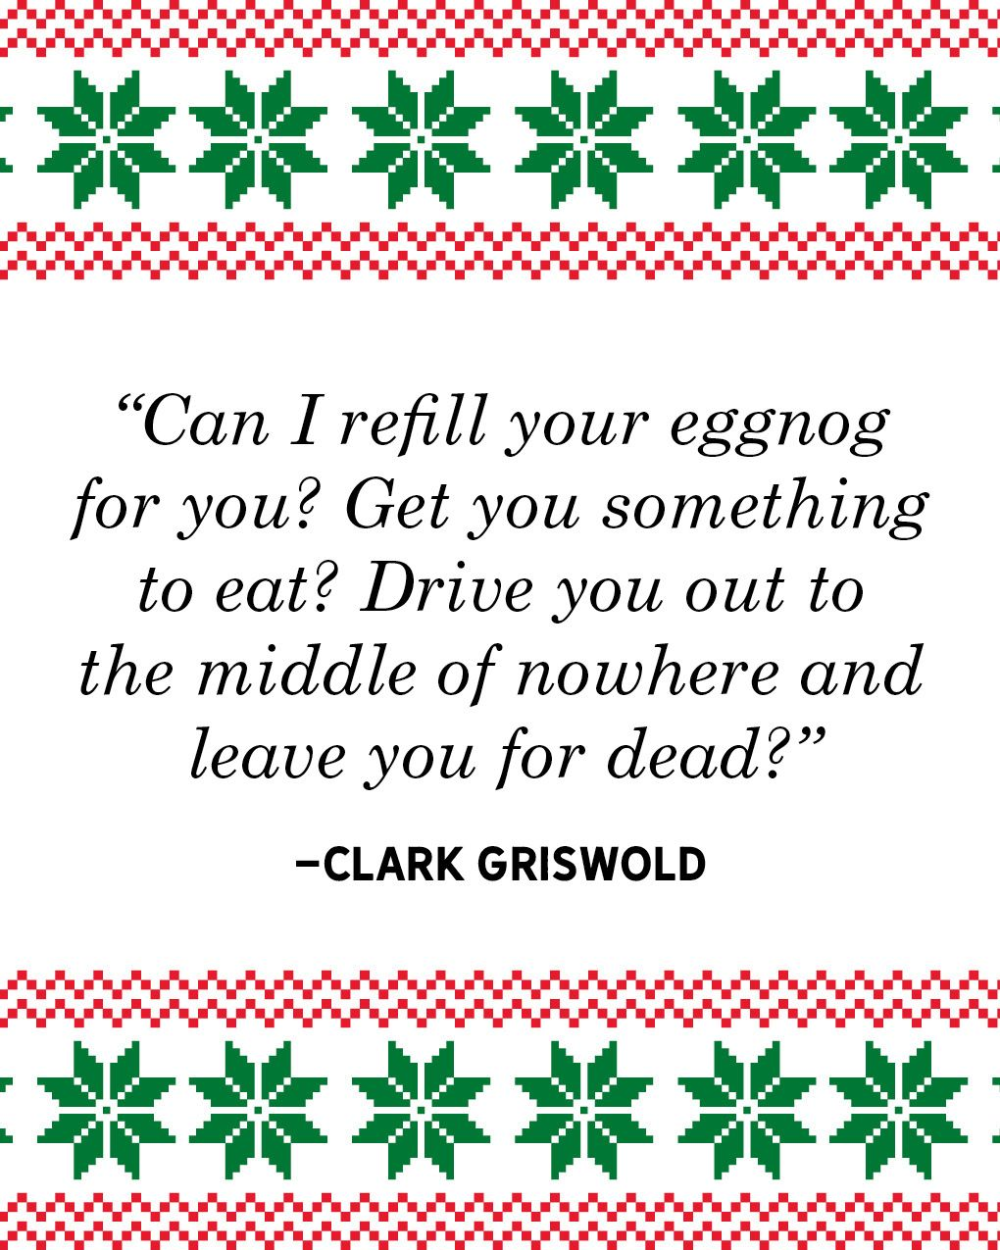 List  30+ Best "National Lampoon's Christmas Vacation" Movie Quotes